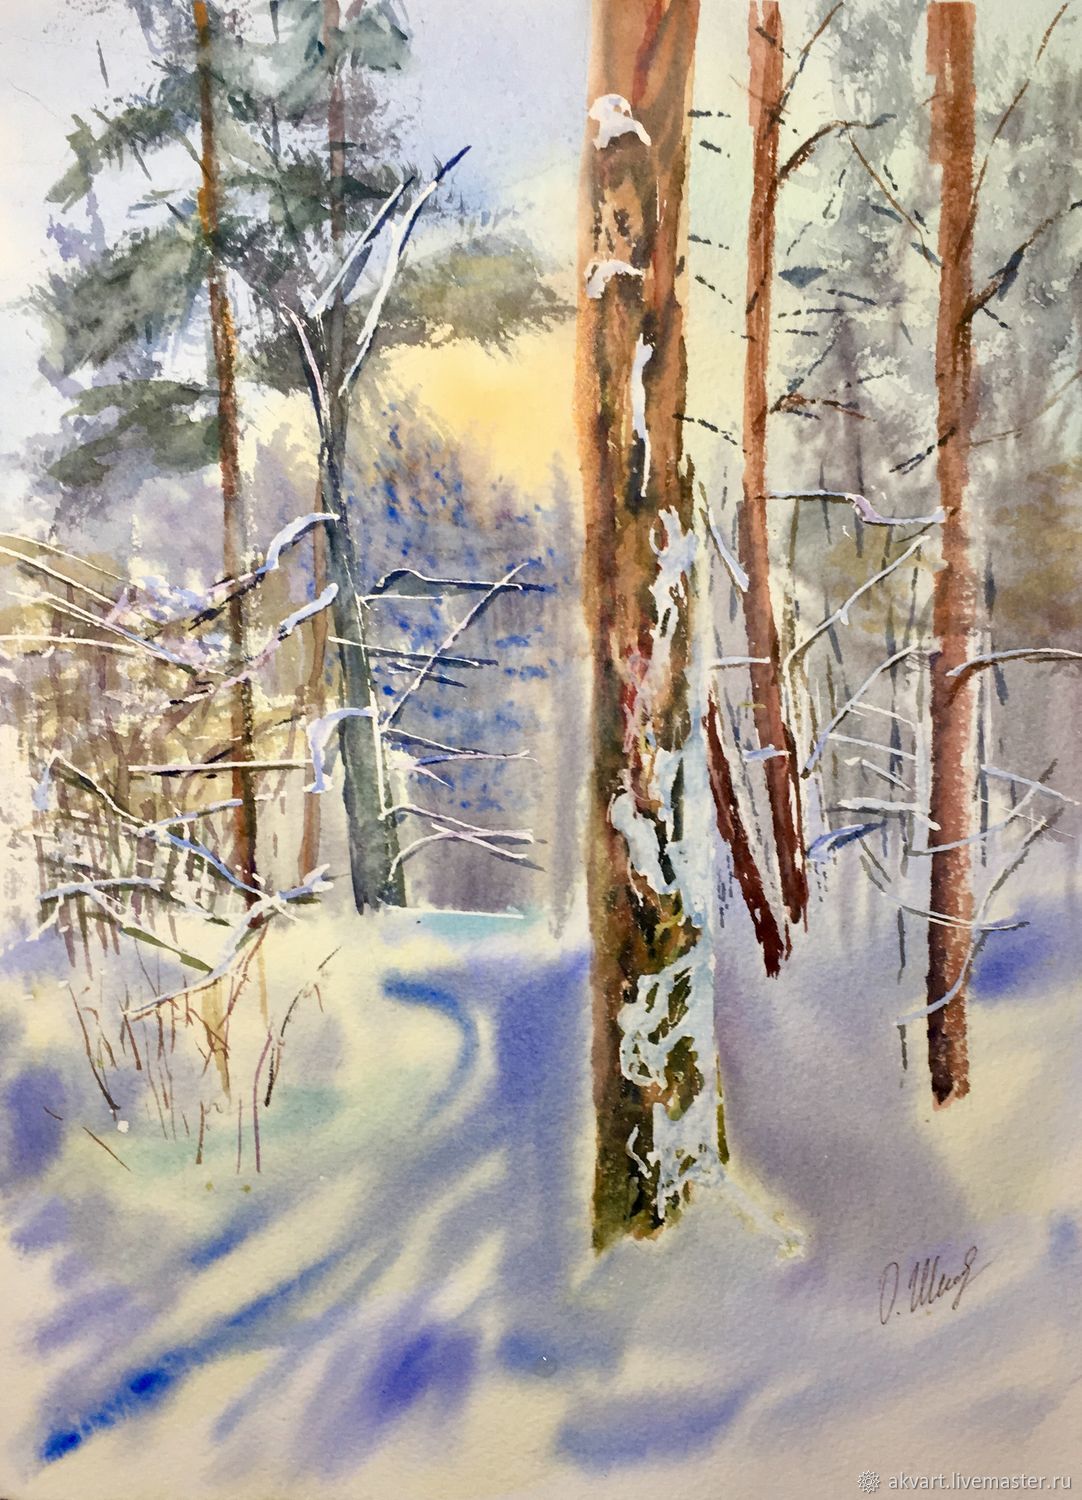 Painting watercolor. Winter in elk island, Pictures, Moscow,  Фото №1